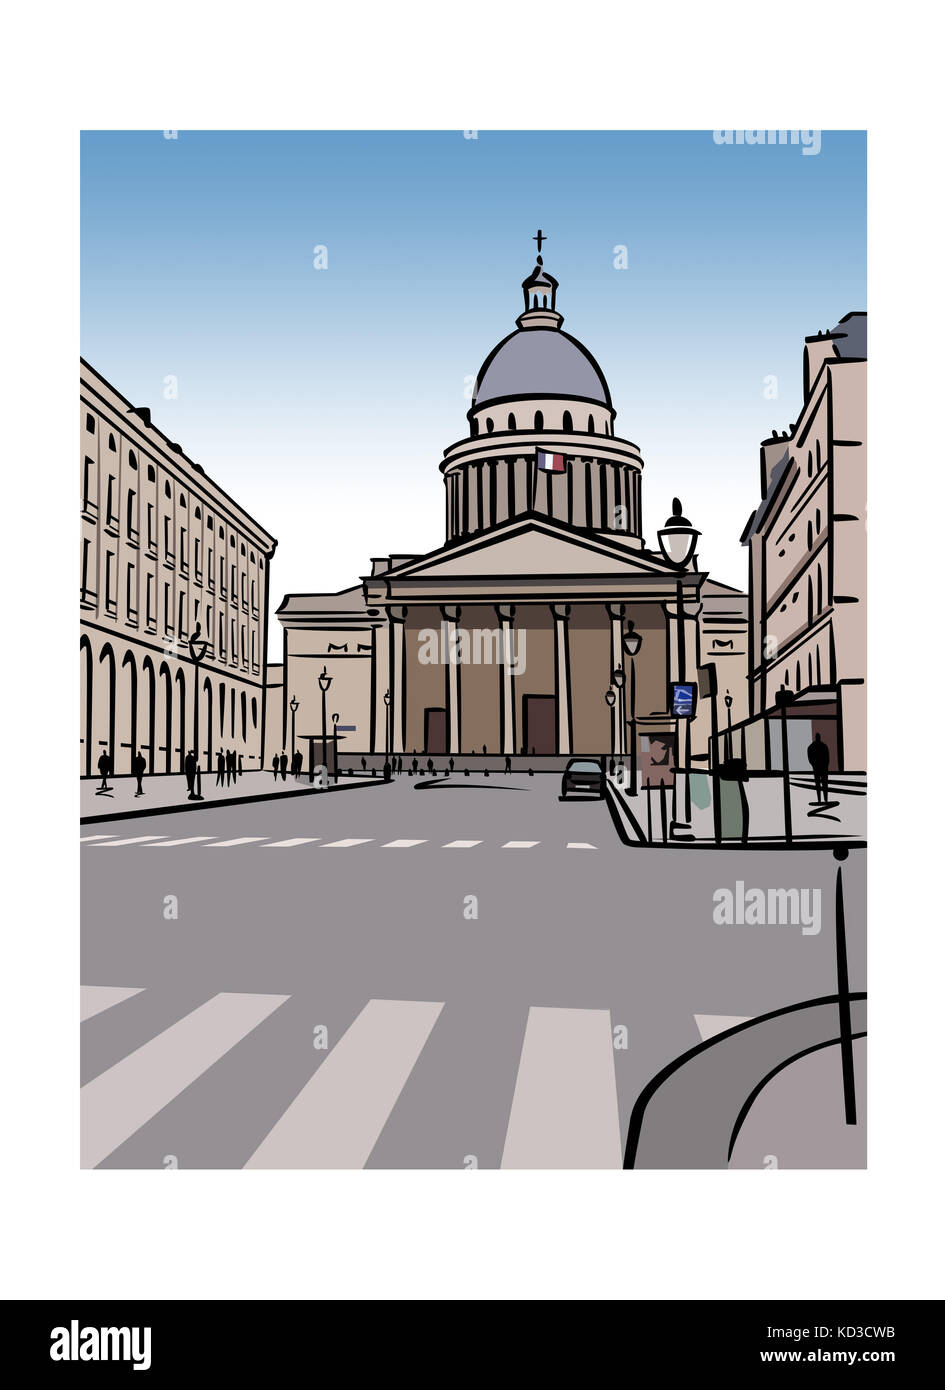 Illustration of the Pantheon in Paris, France Stock Photo